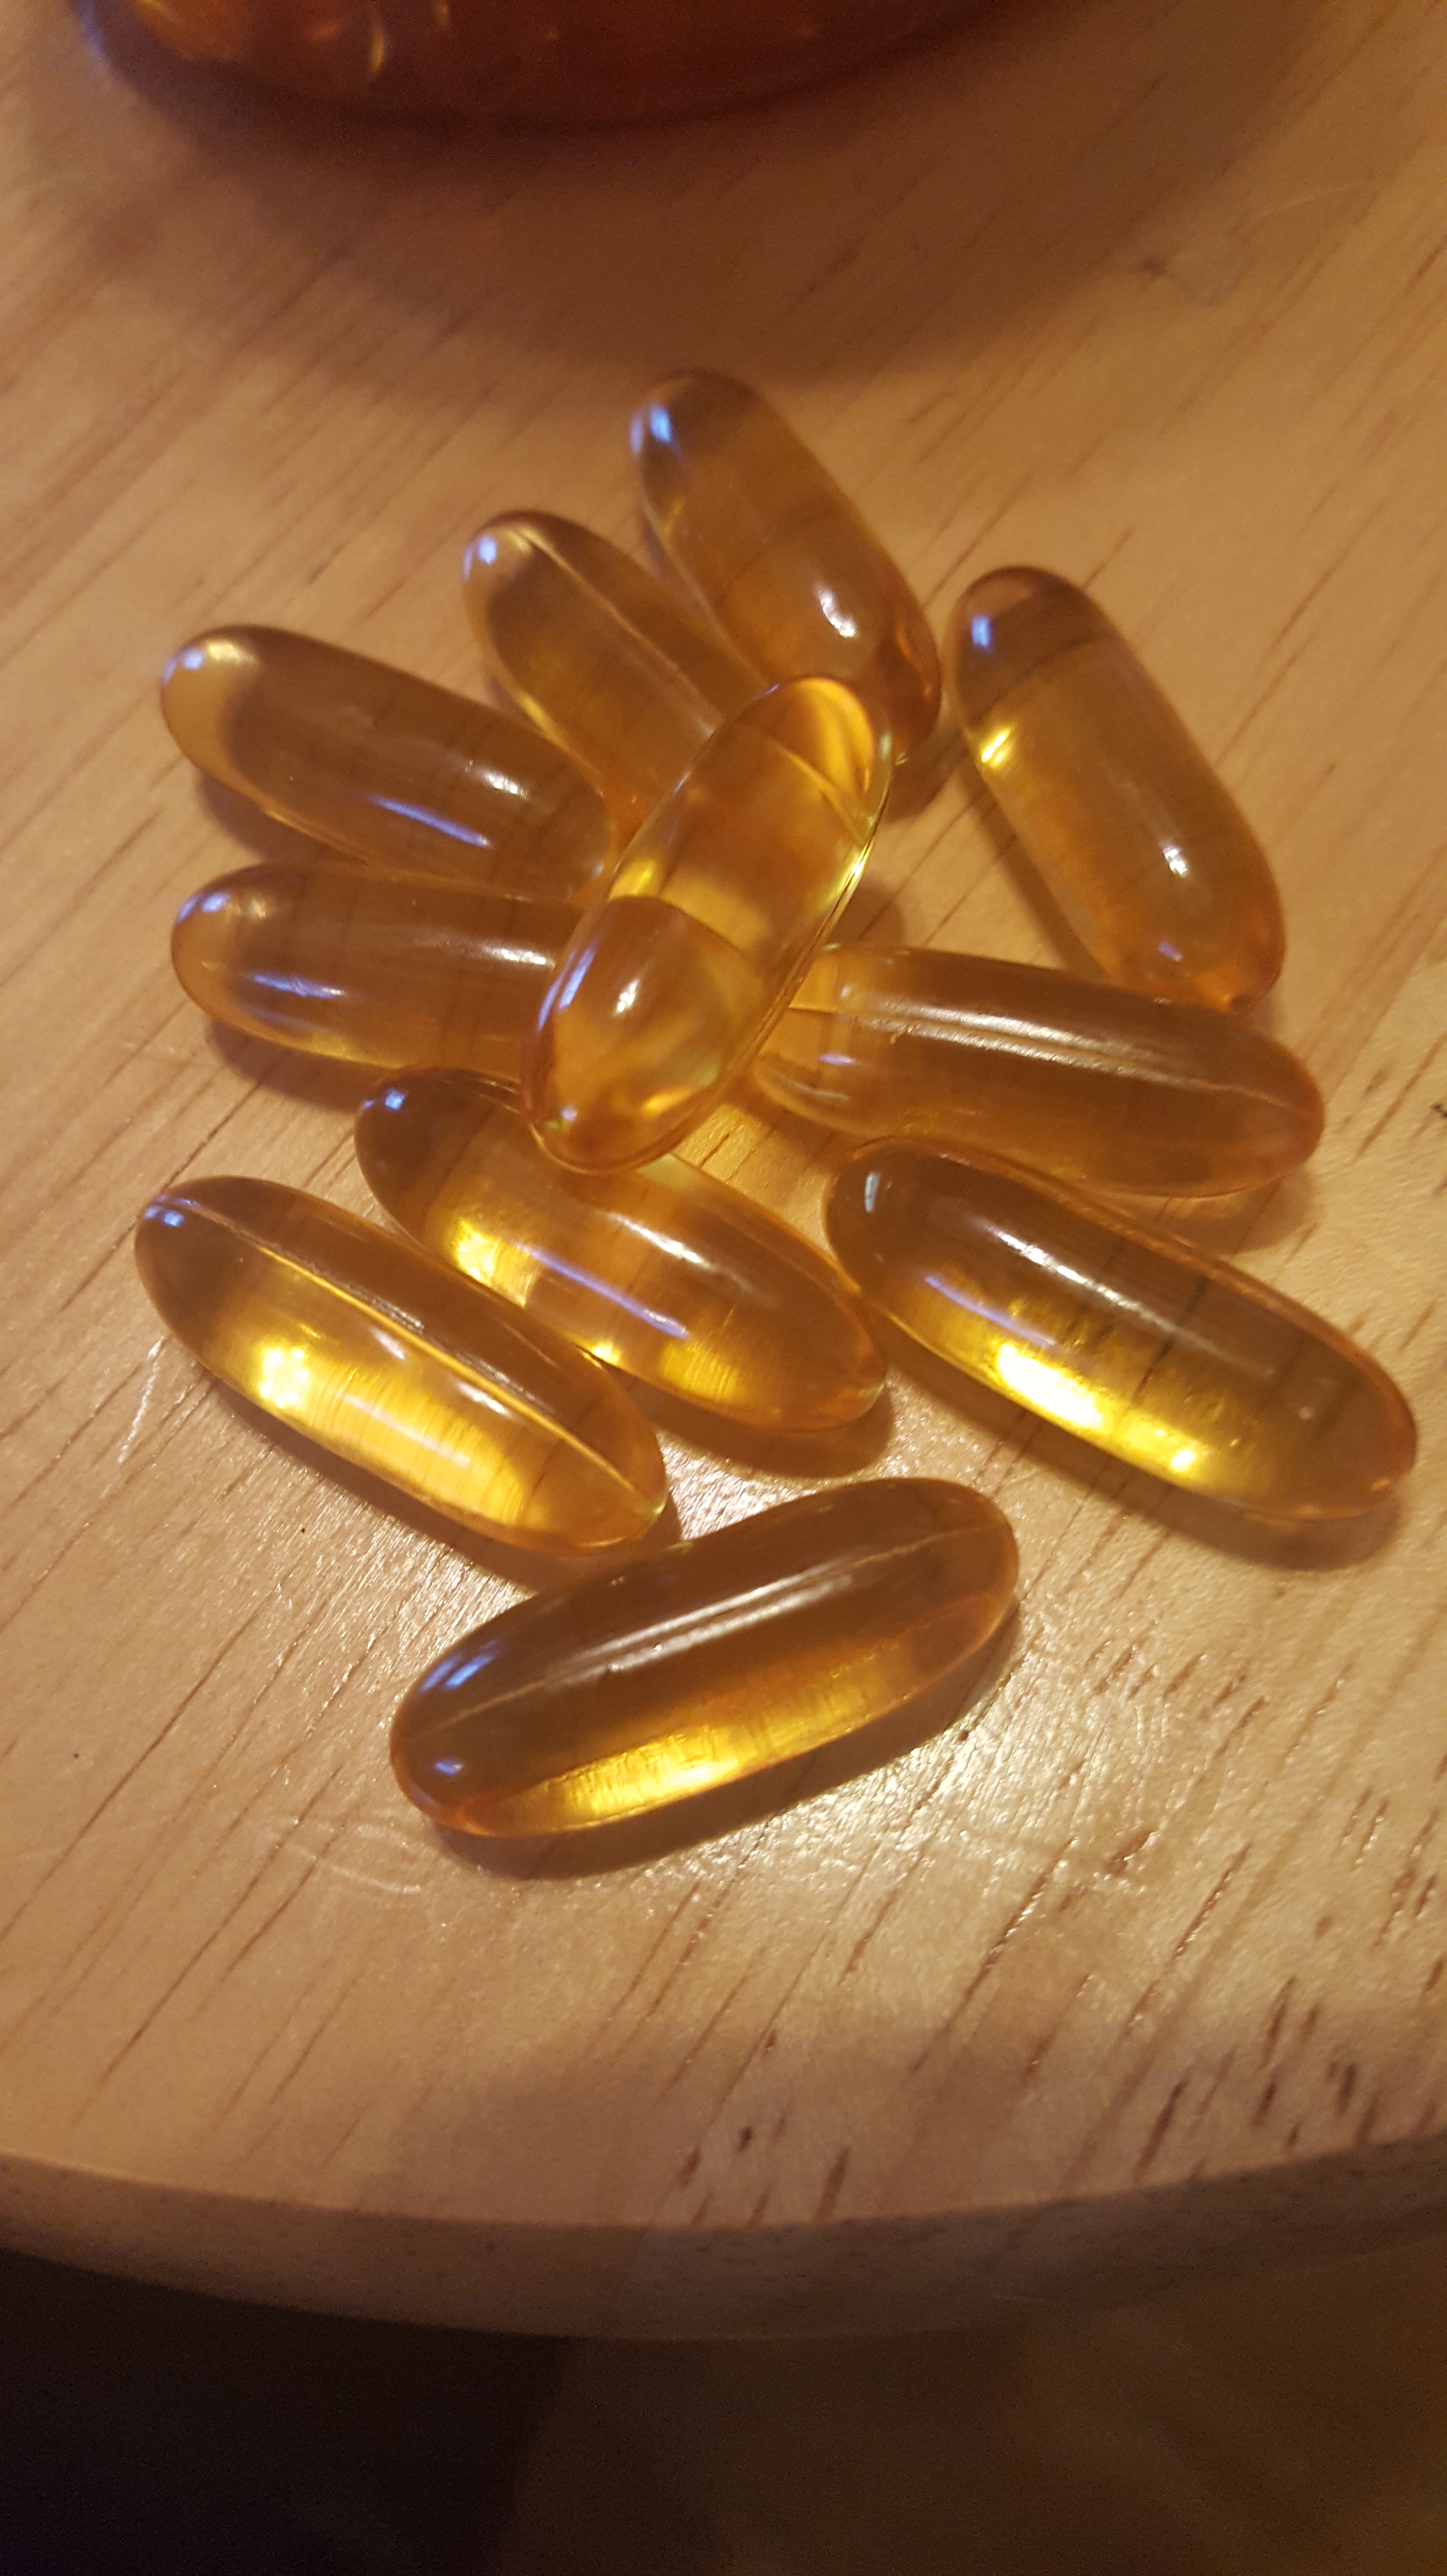 fish oil tablets treat psoriasis